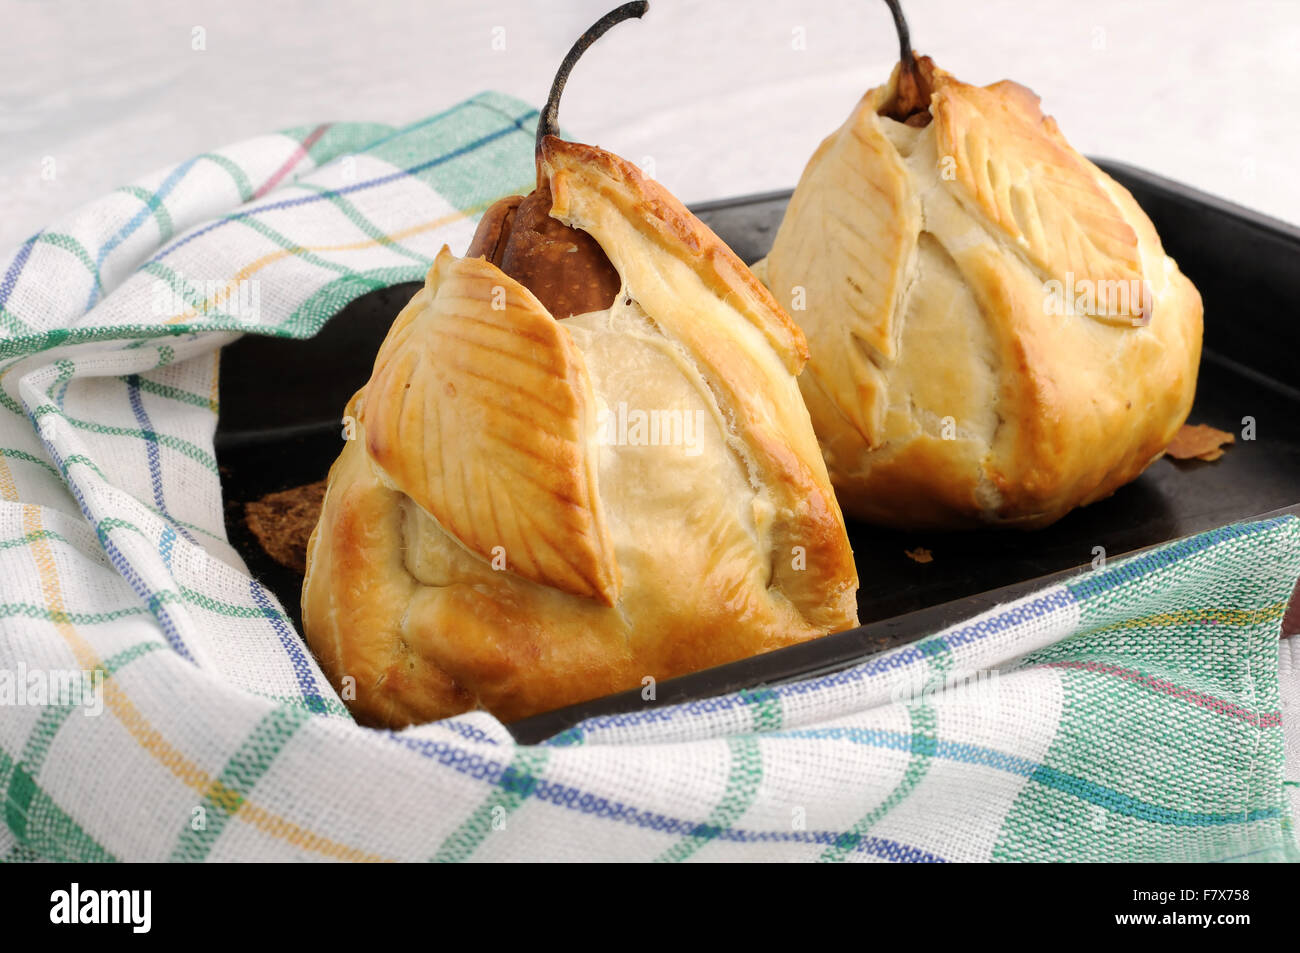 Baked pears stuffed with a mixture of nuts and raisins in the dough Stock Photo